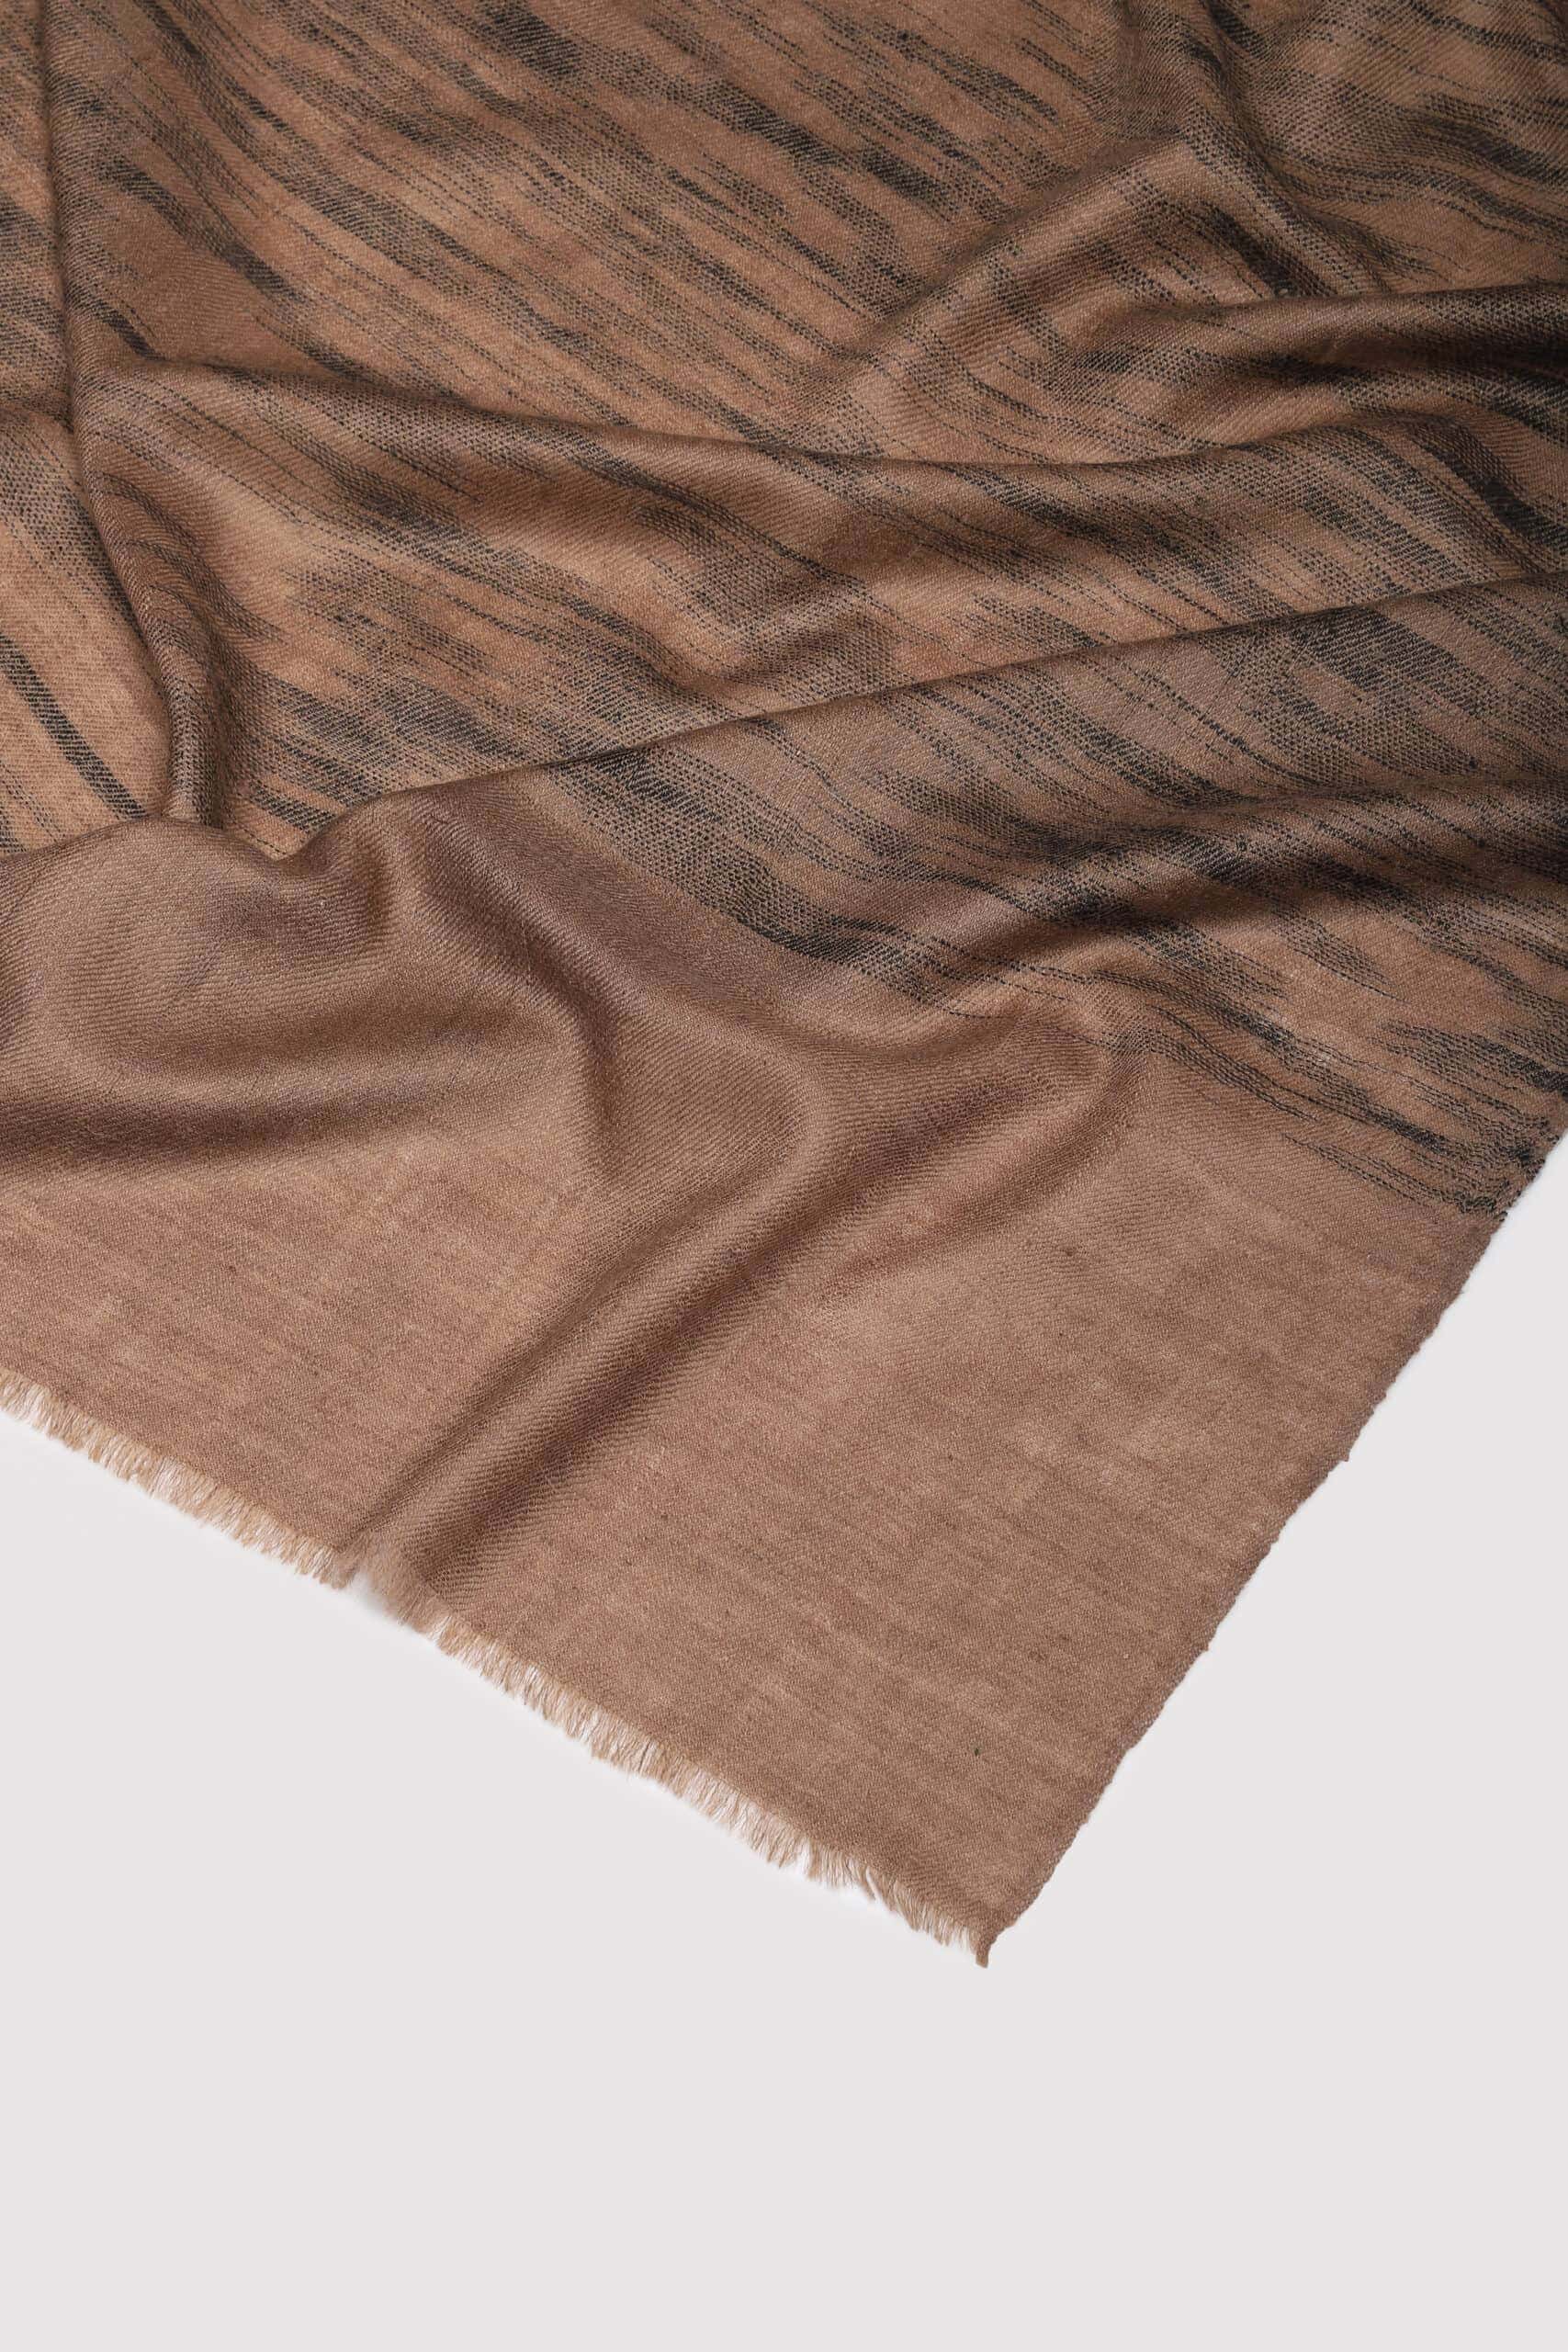 Brown and black colored Ikat shawl on a white background- Me & K